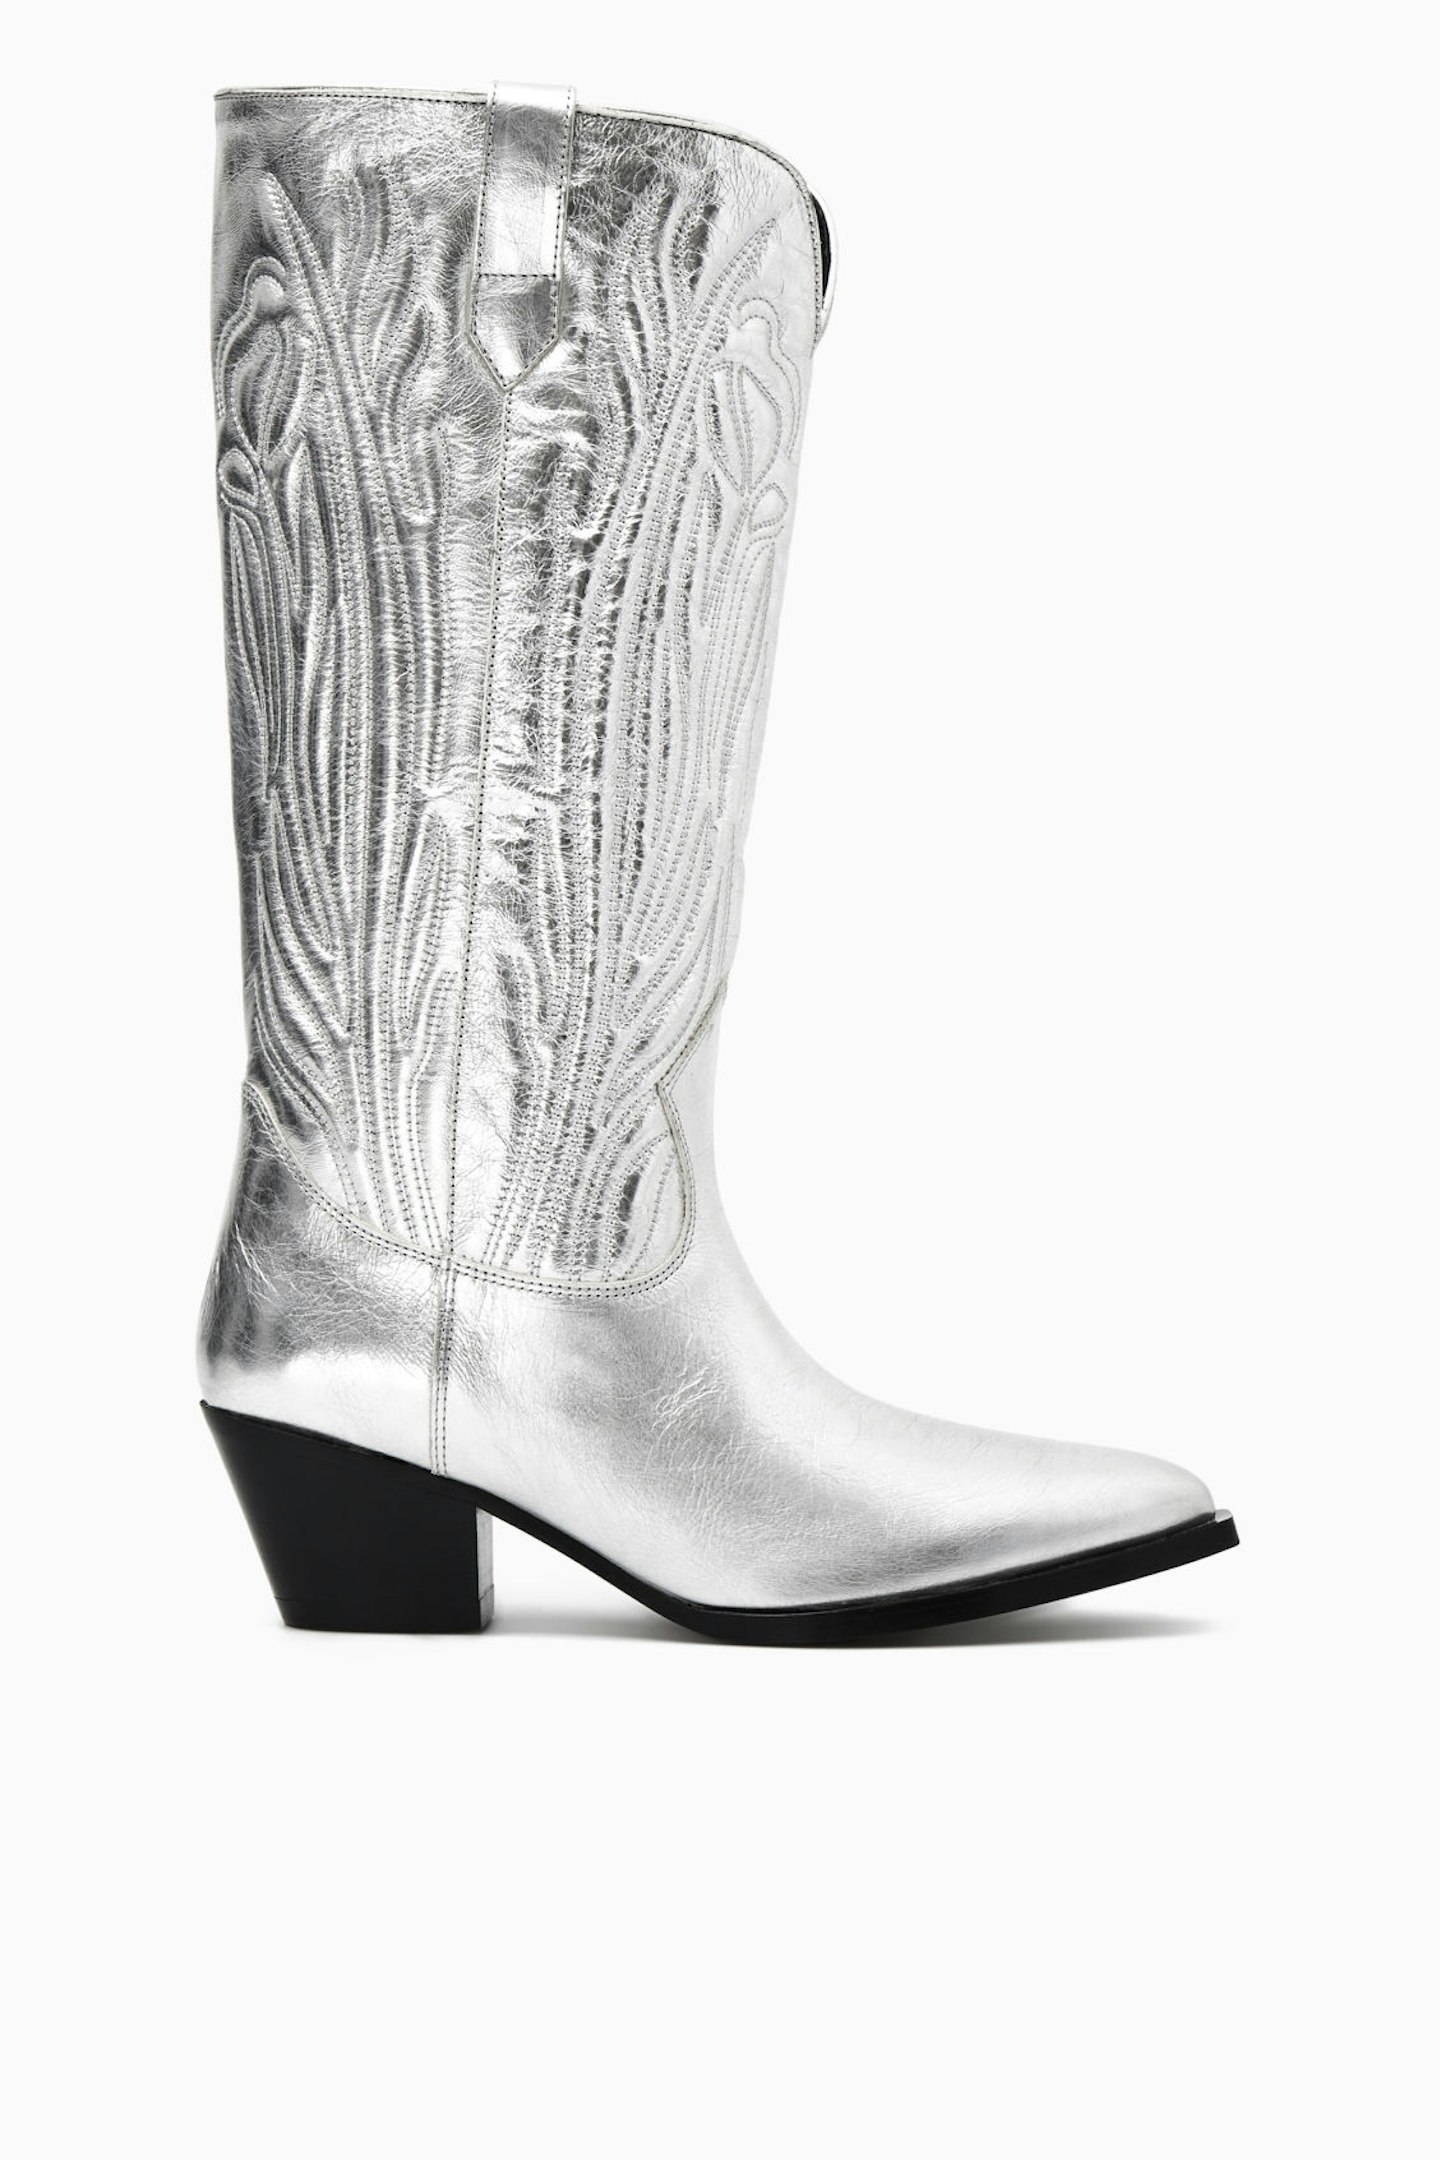 COS, Embroidered Leather Cowboy Boots